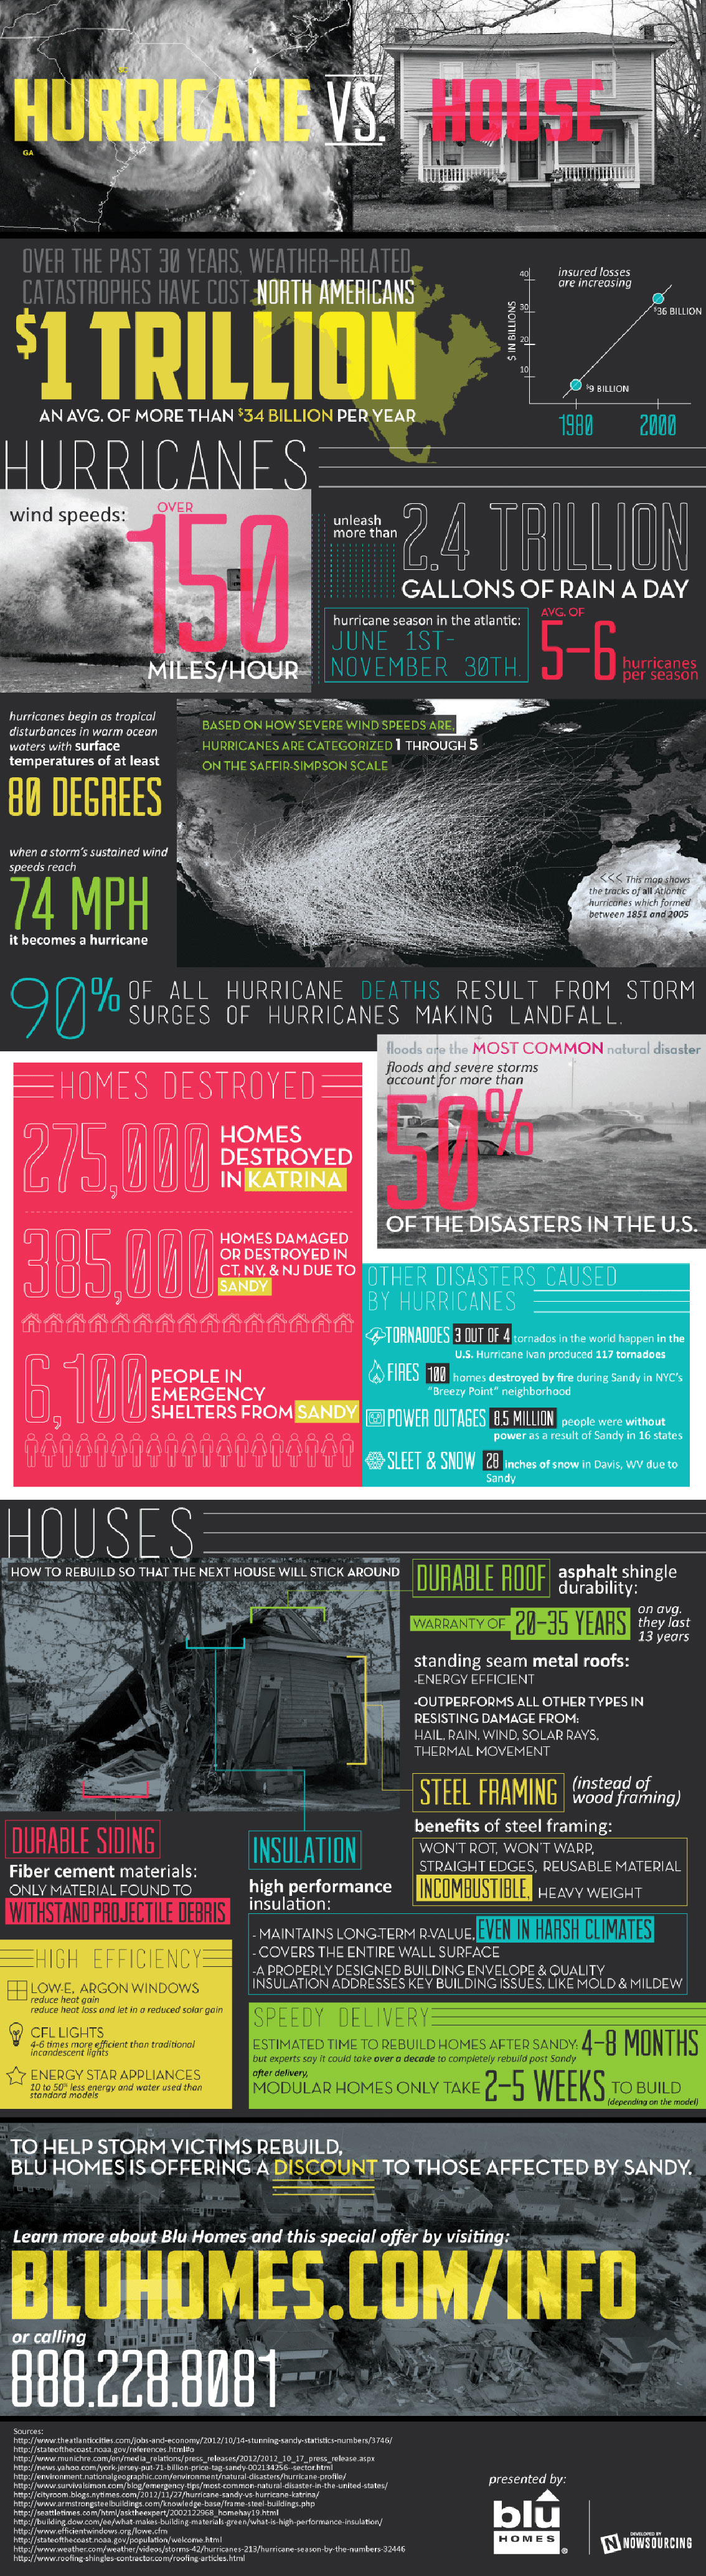 Damages Caused by Hurricanes to American Homes Infographic